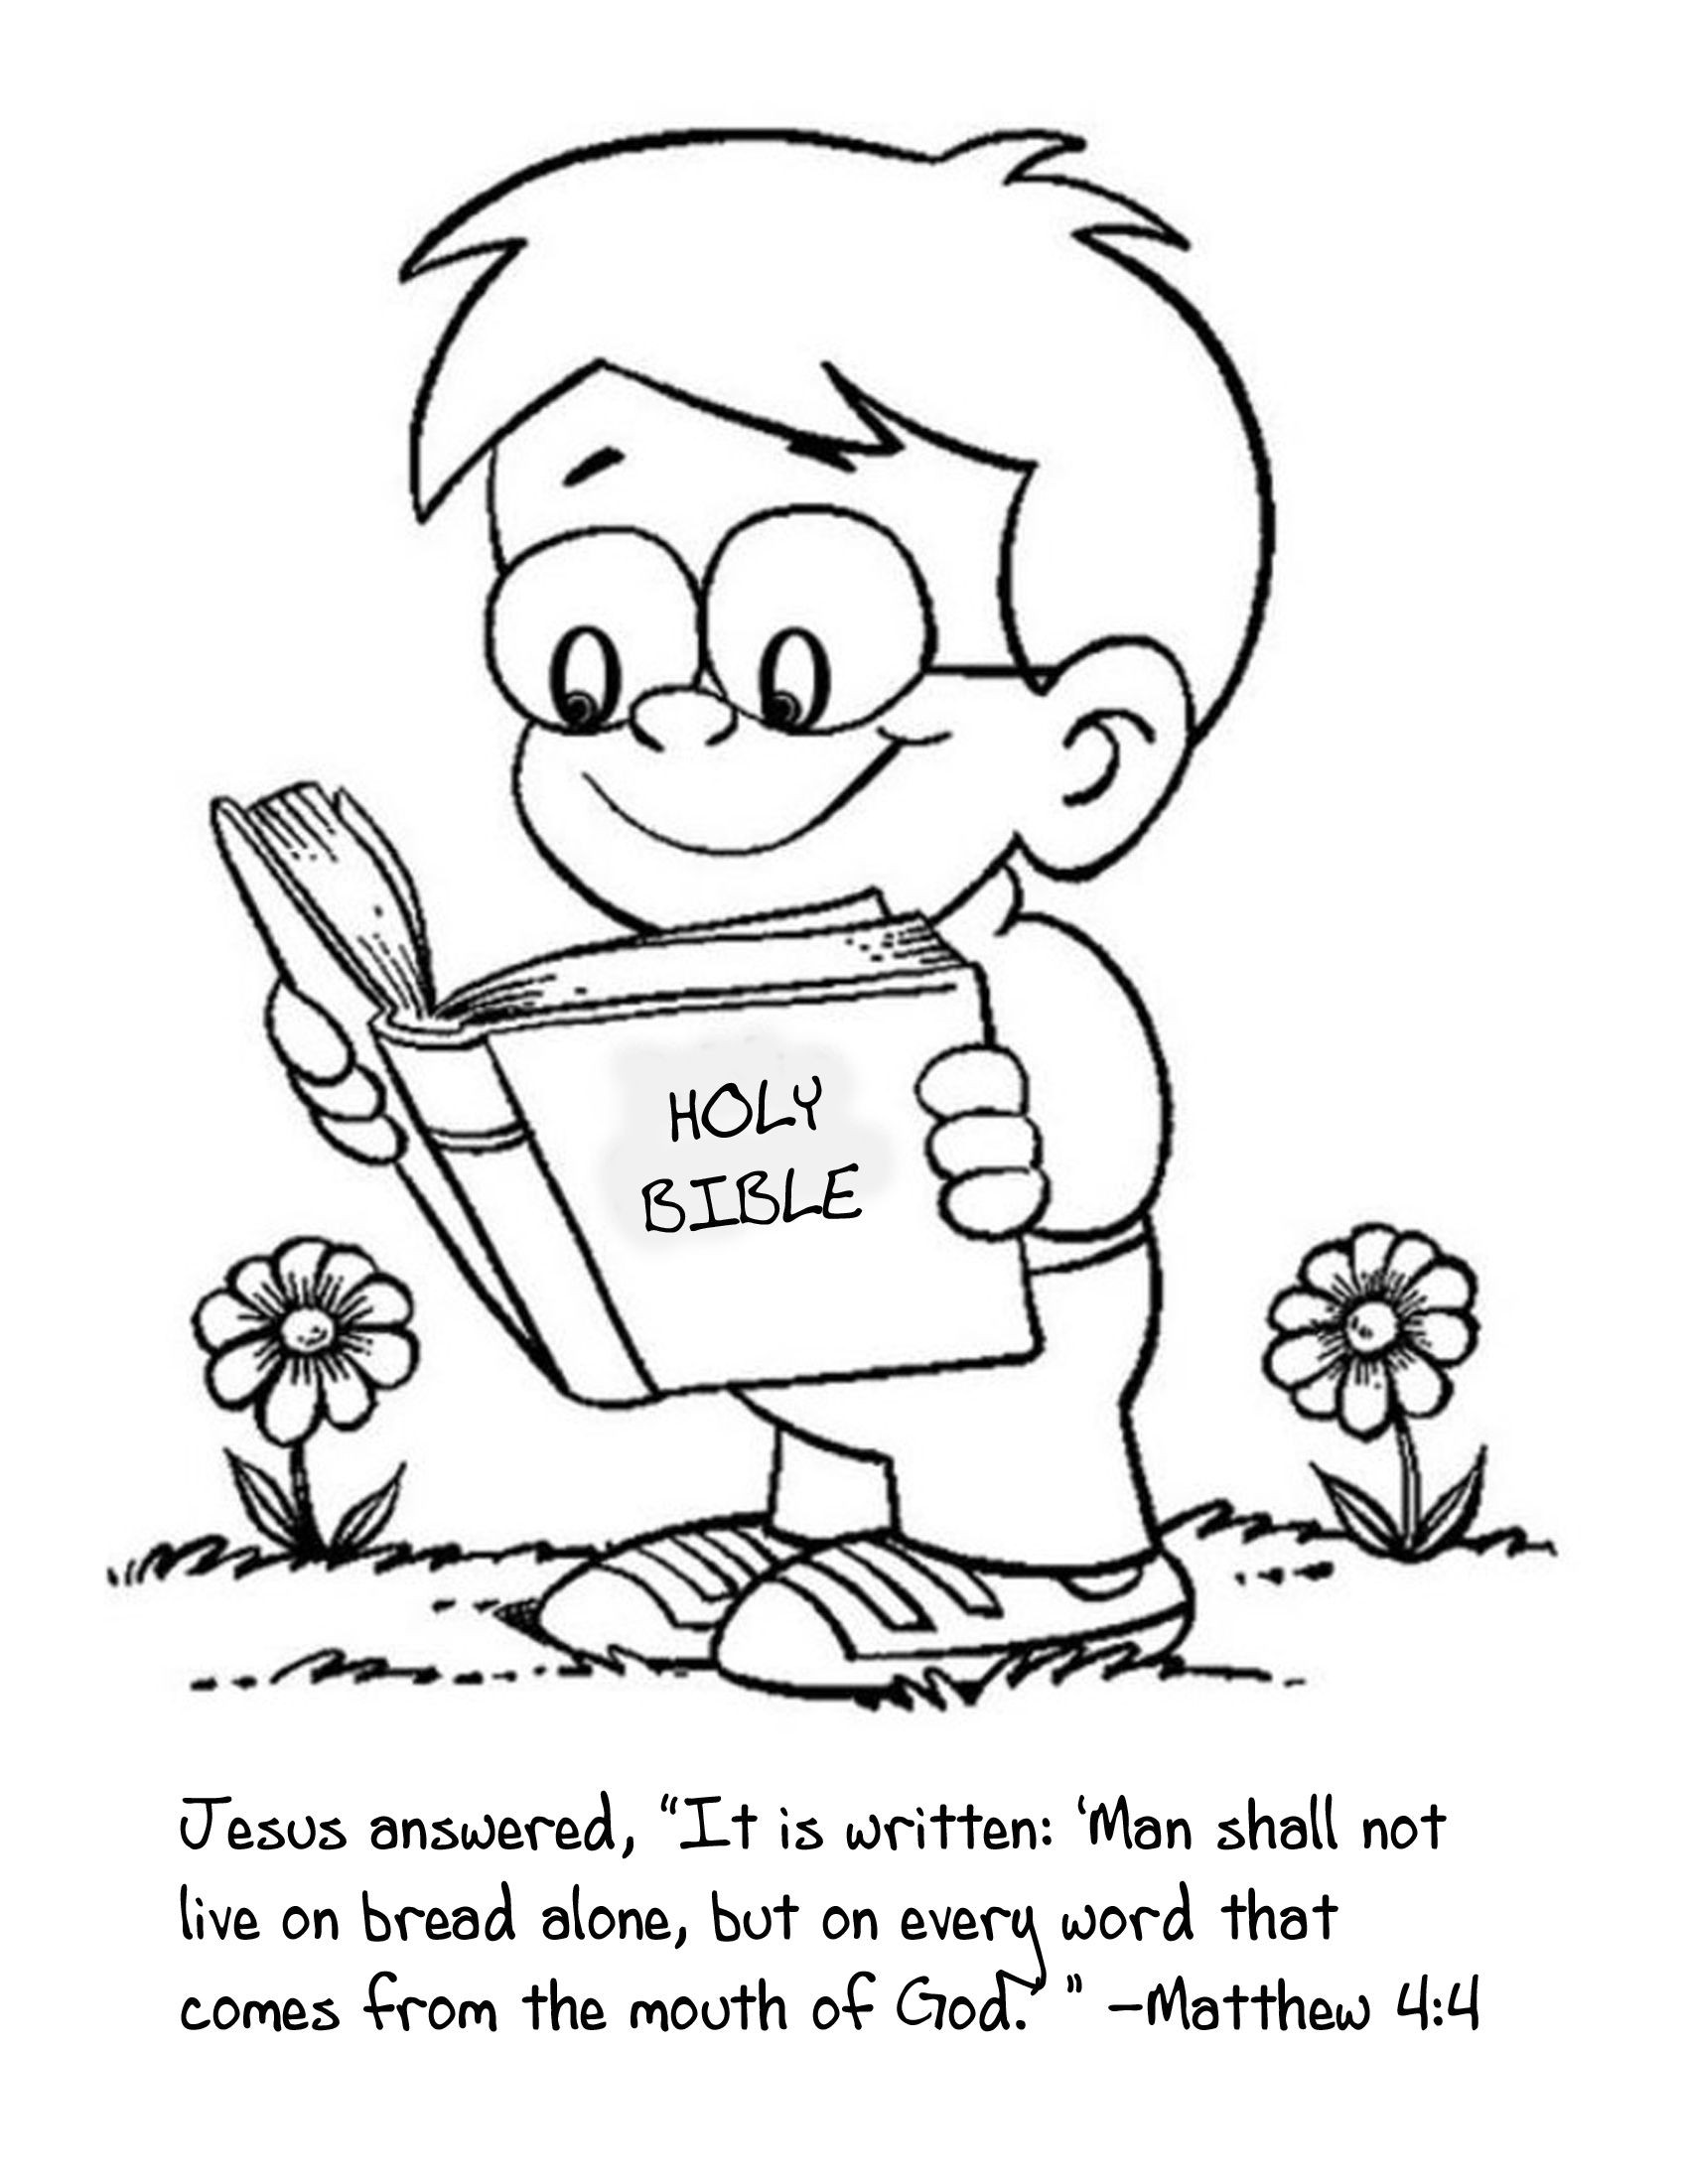 Bible Coloring Sheets For Kids
 Pin about Bible coloring pages and Kids reading on Sunday